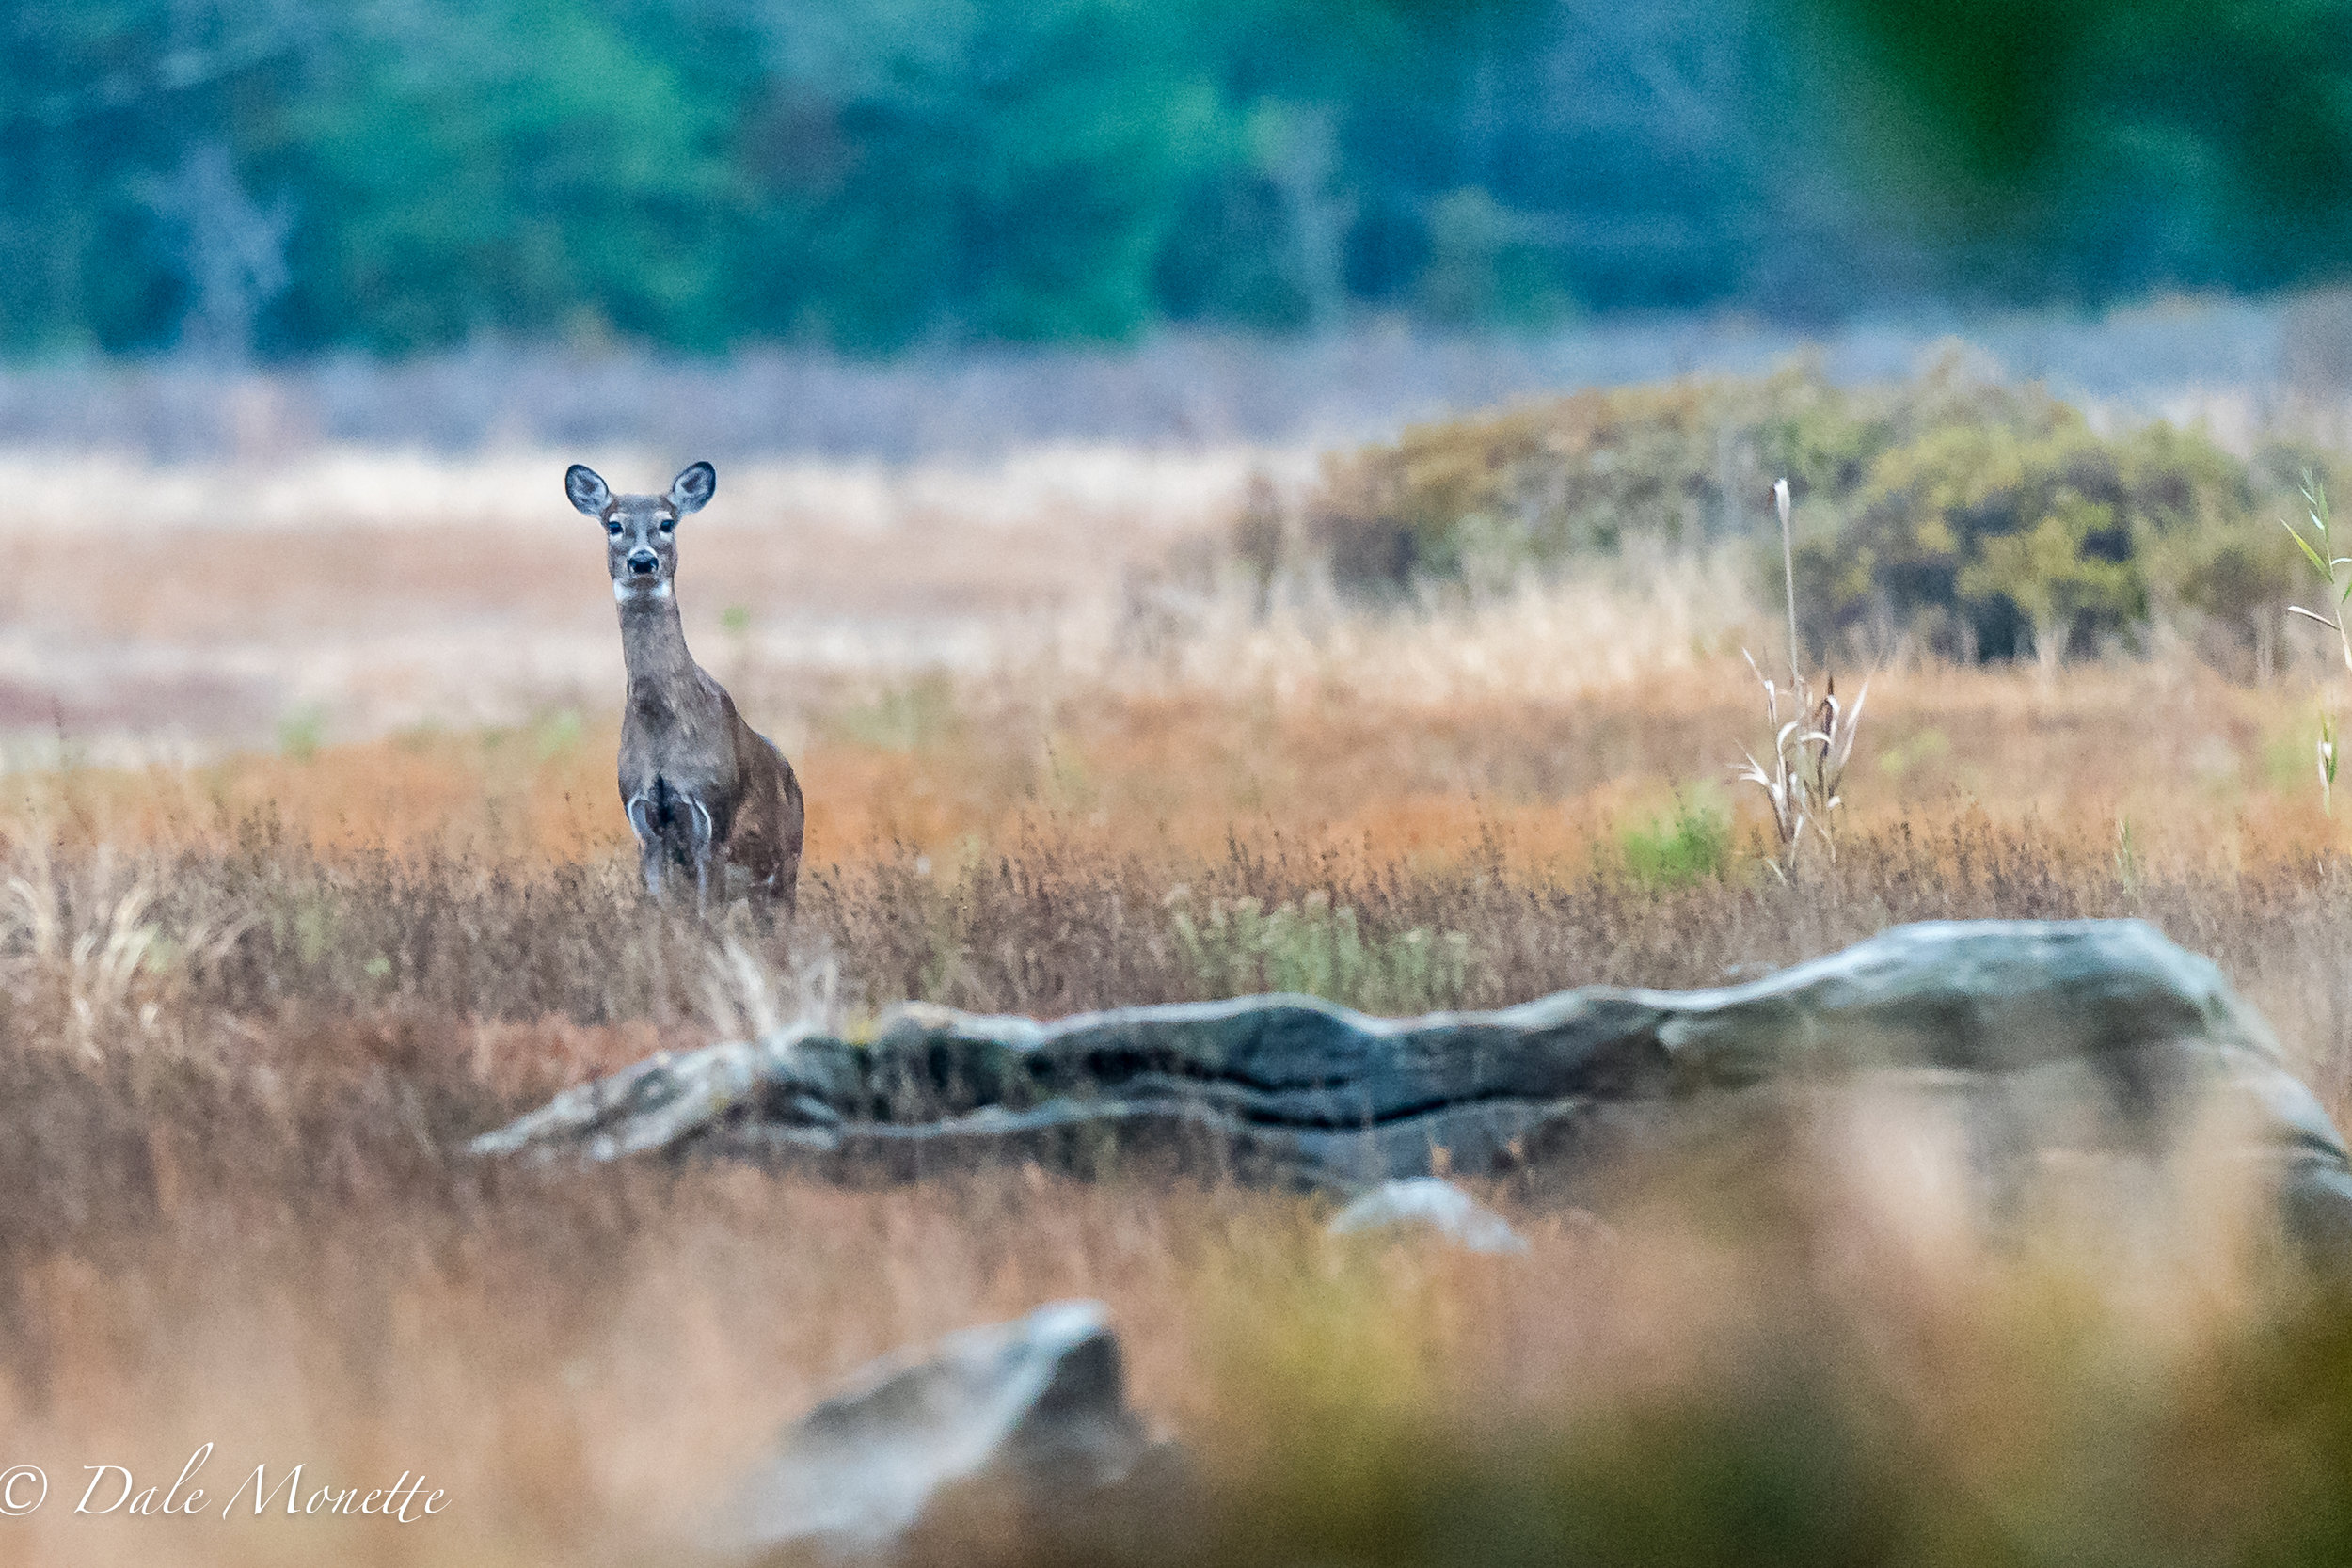   Finally&nbsp; !!!&nbsp; I got out into the Quabbin and this doe greeted me and then disappeared into thin air...  